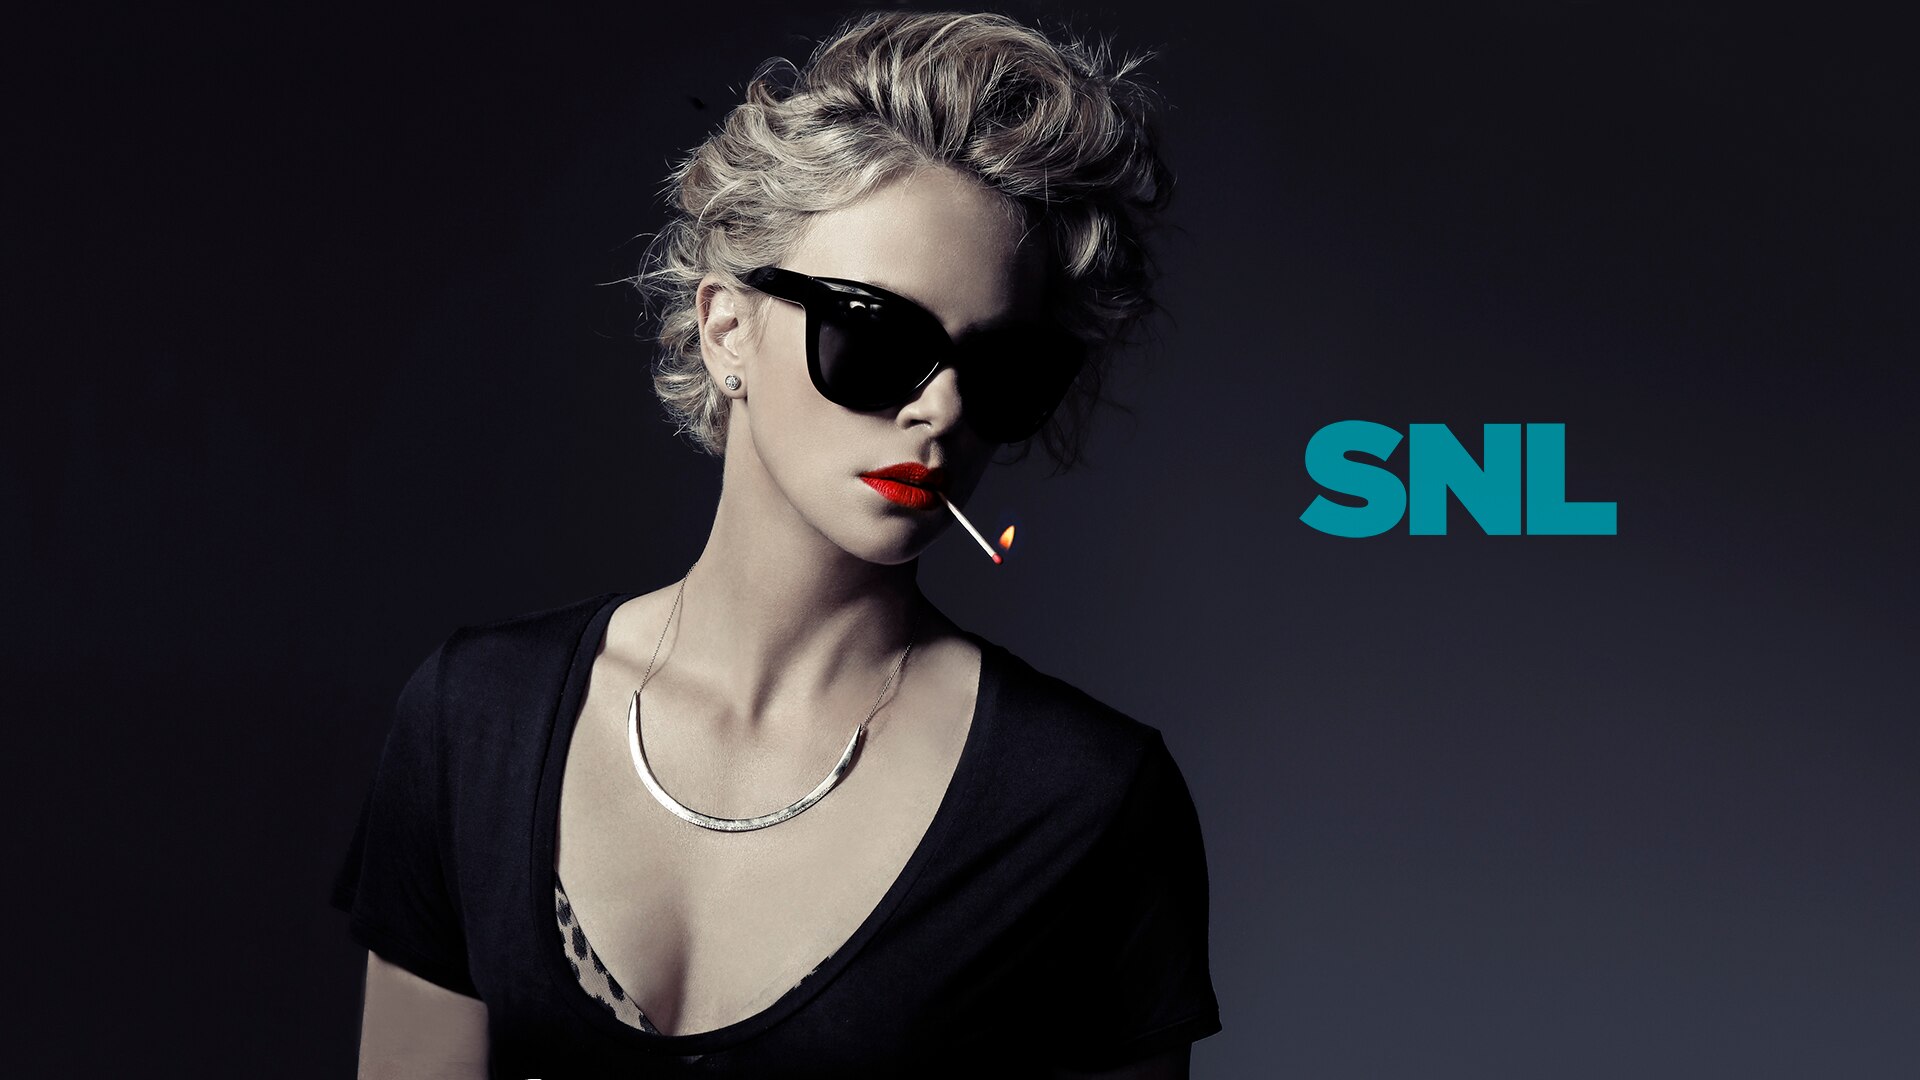 Saturday Night Live: Charlize Theron and The Black Keys Bumper Photos ...